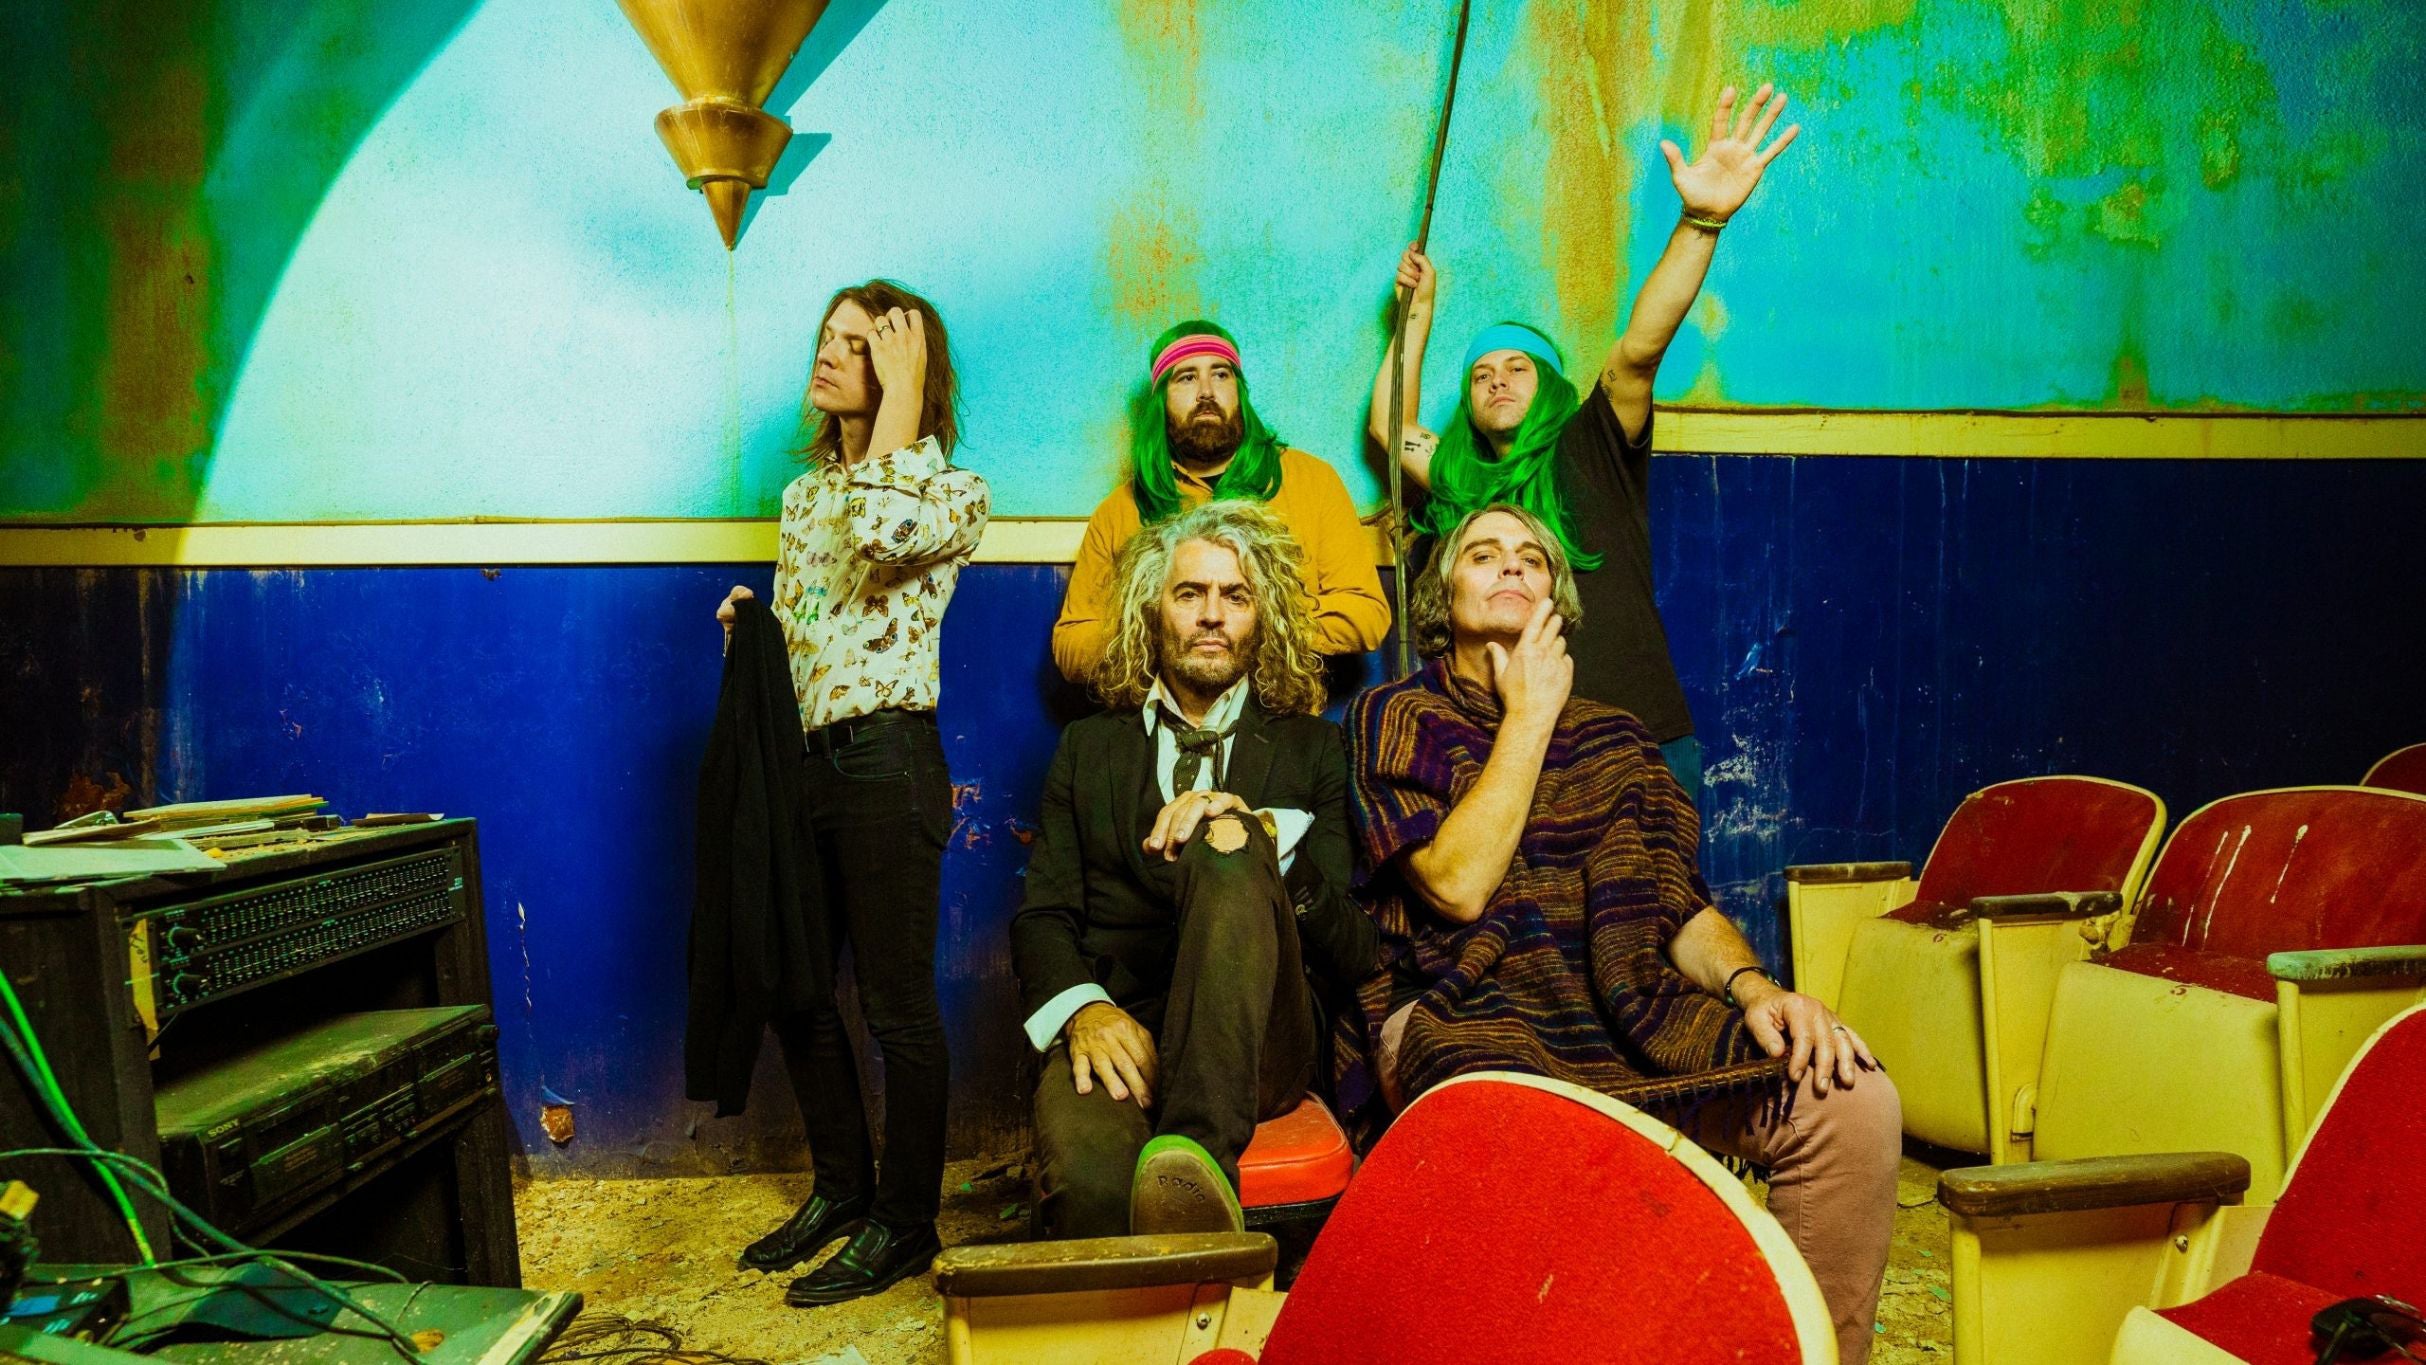 presale password for The Flaming Lips 